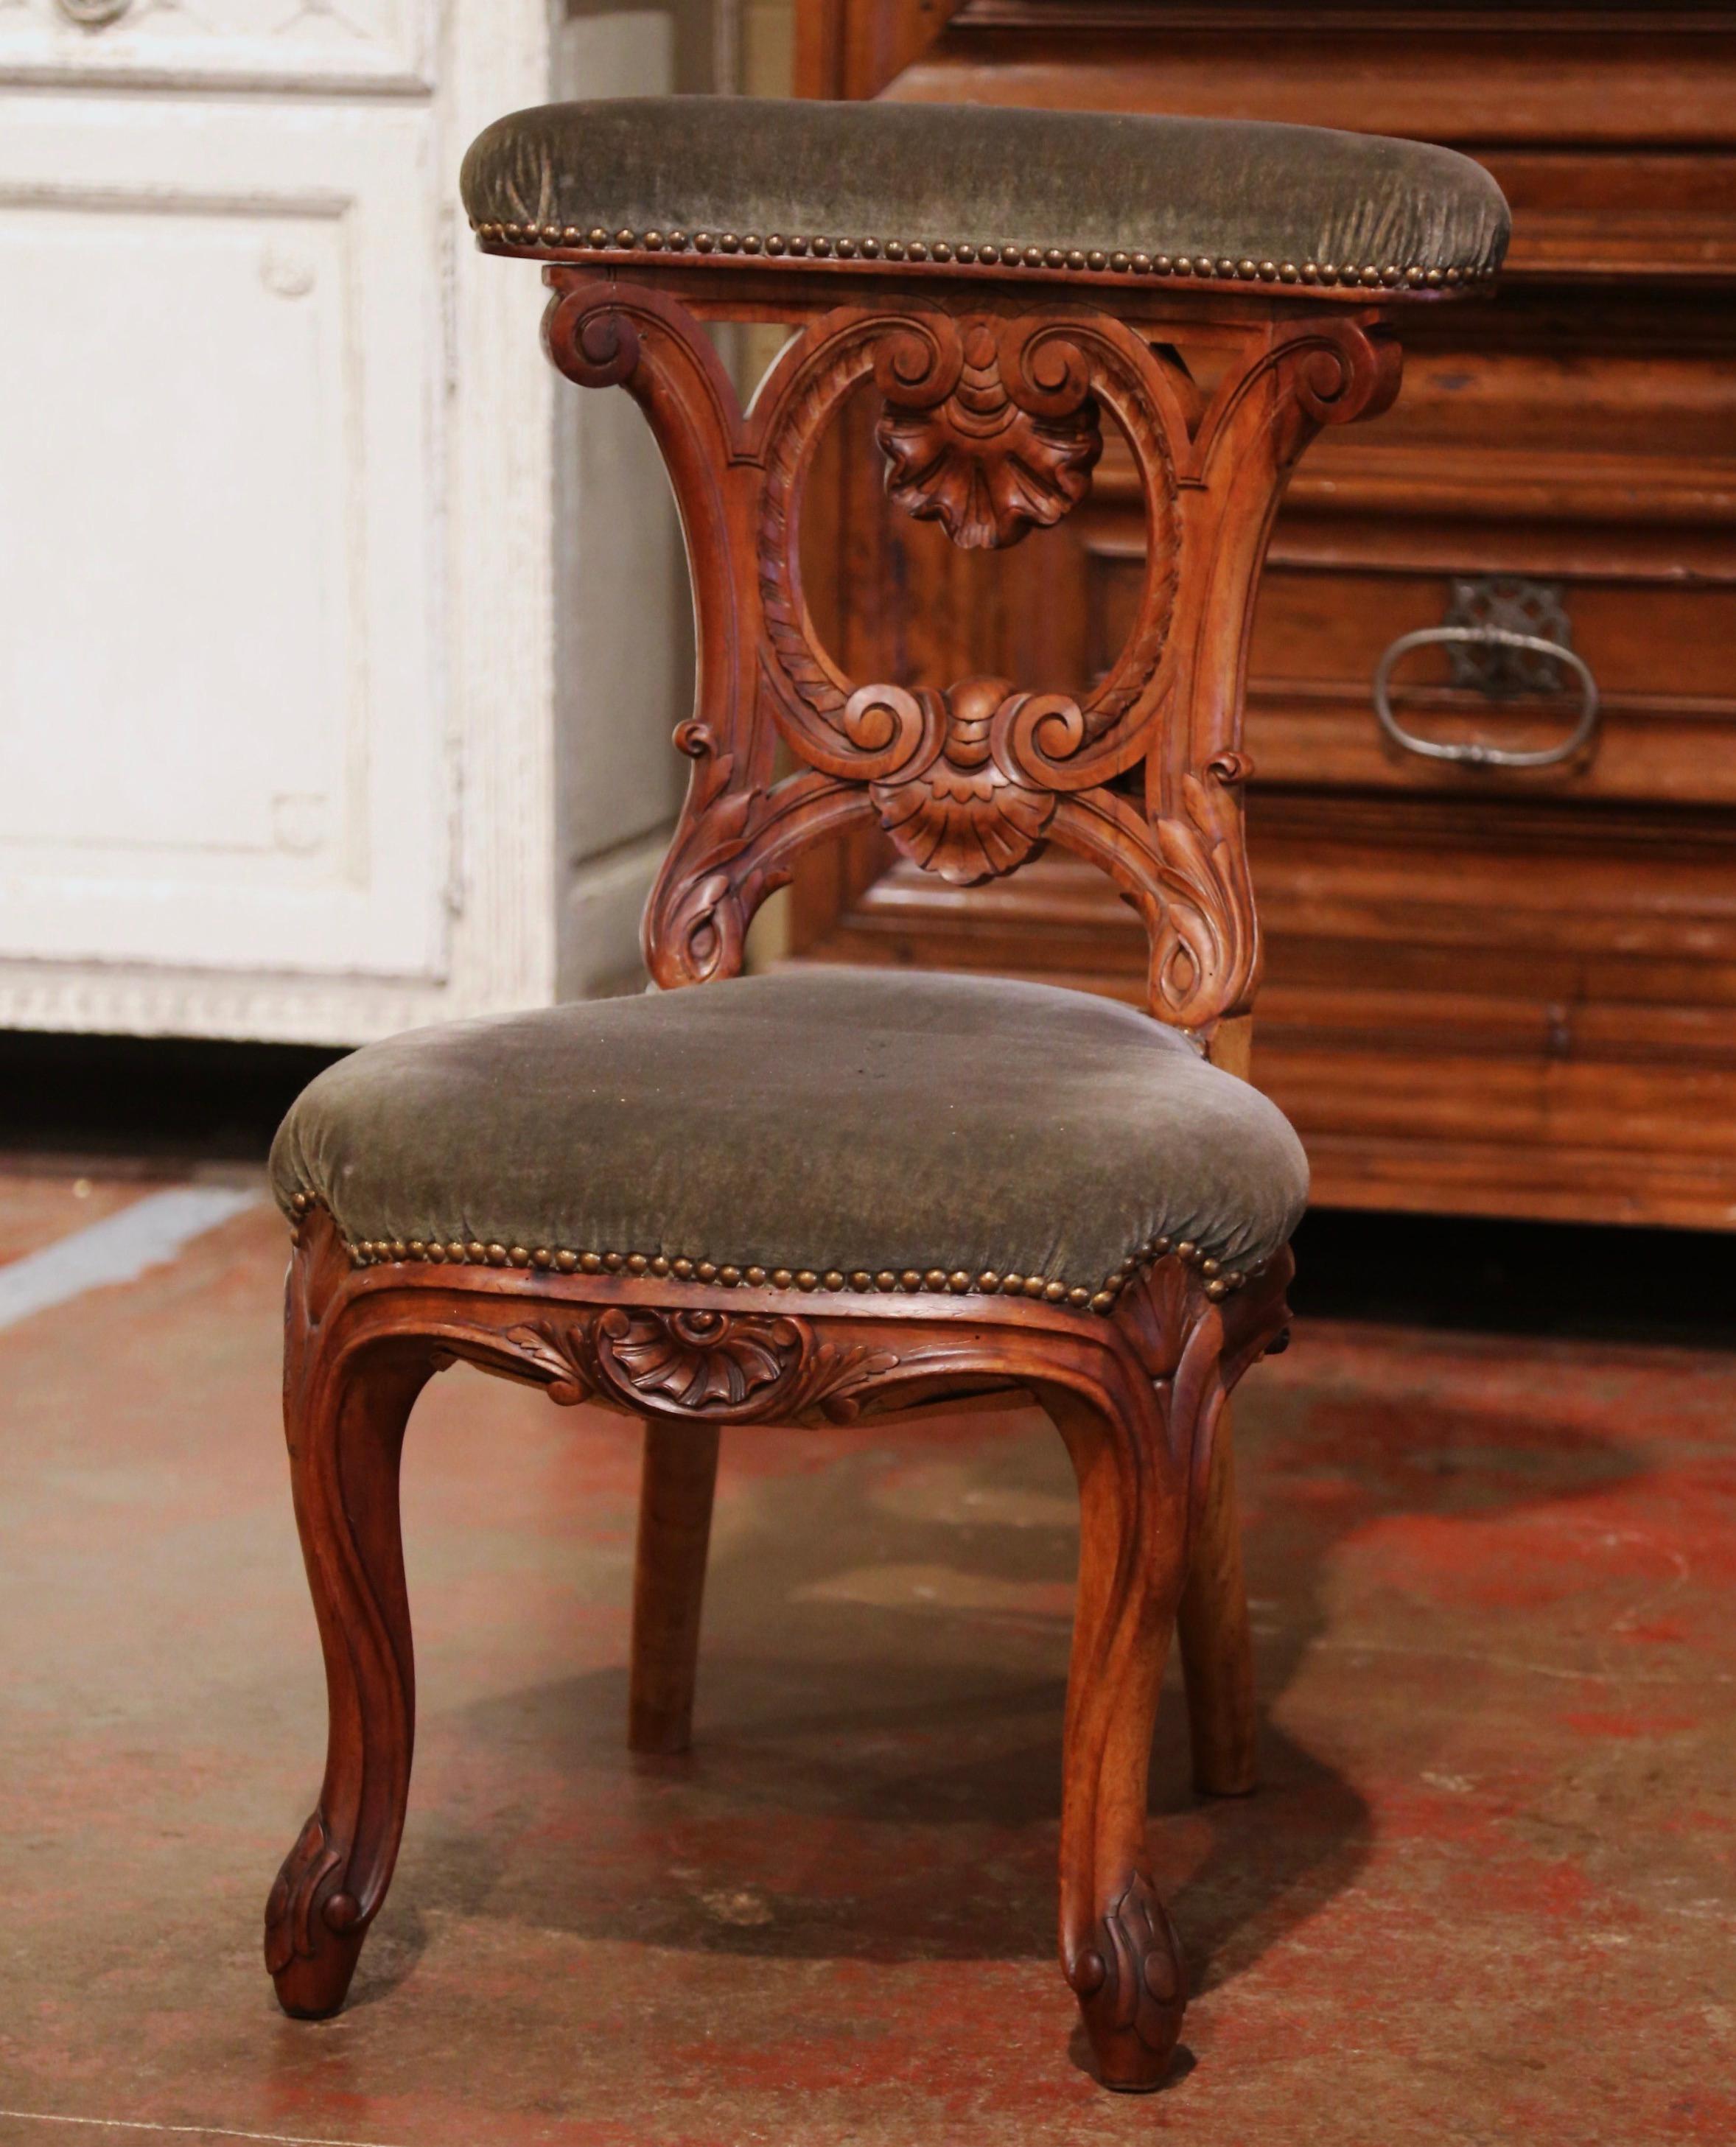 Mid-19th Century French Carved Walnut Prayer Bench or Prie-Dieu with Velvet In Excellent Condition For Sale In Dallas, TX